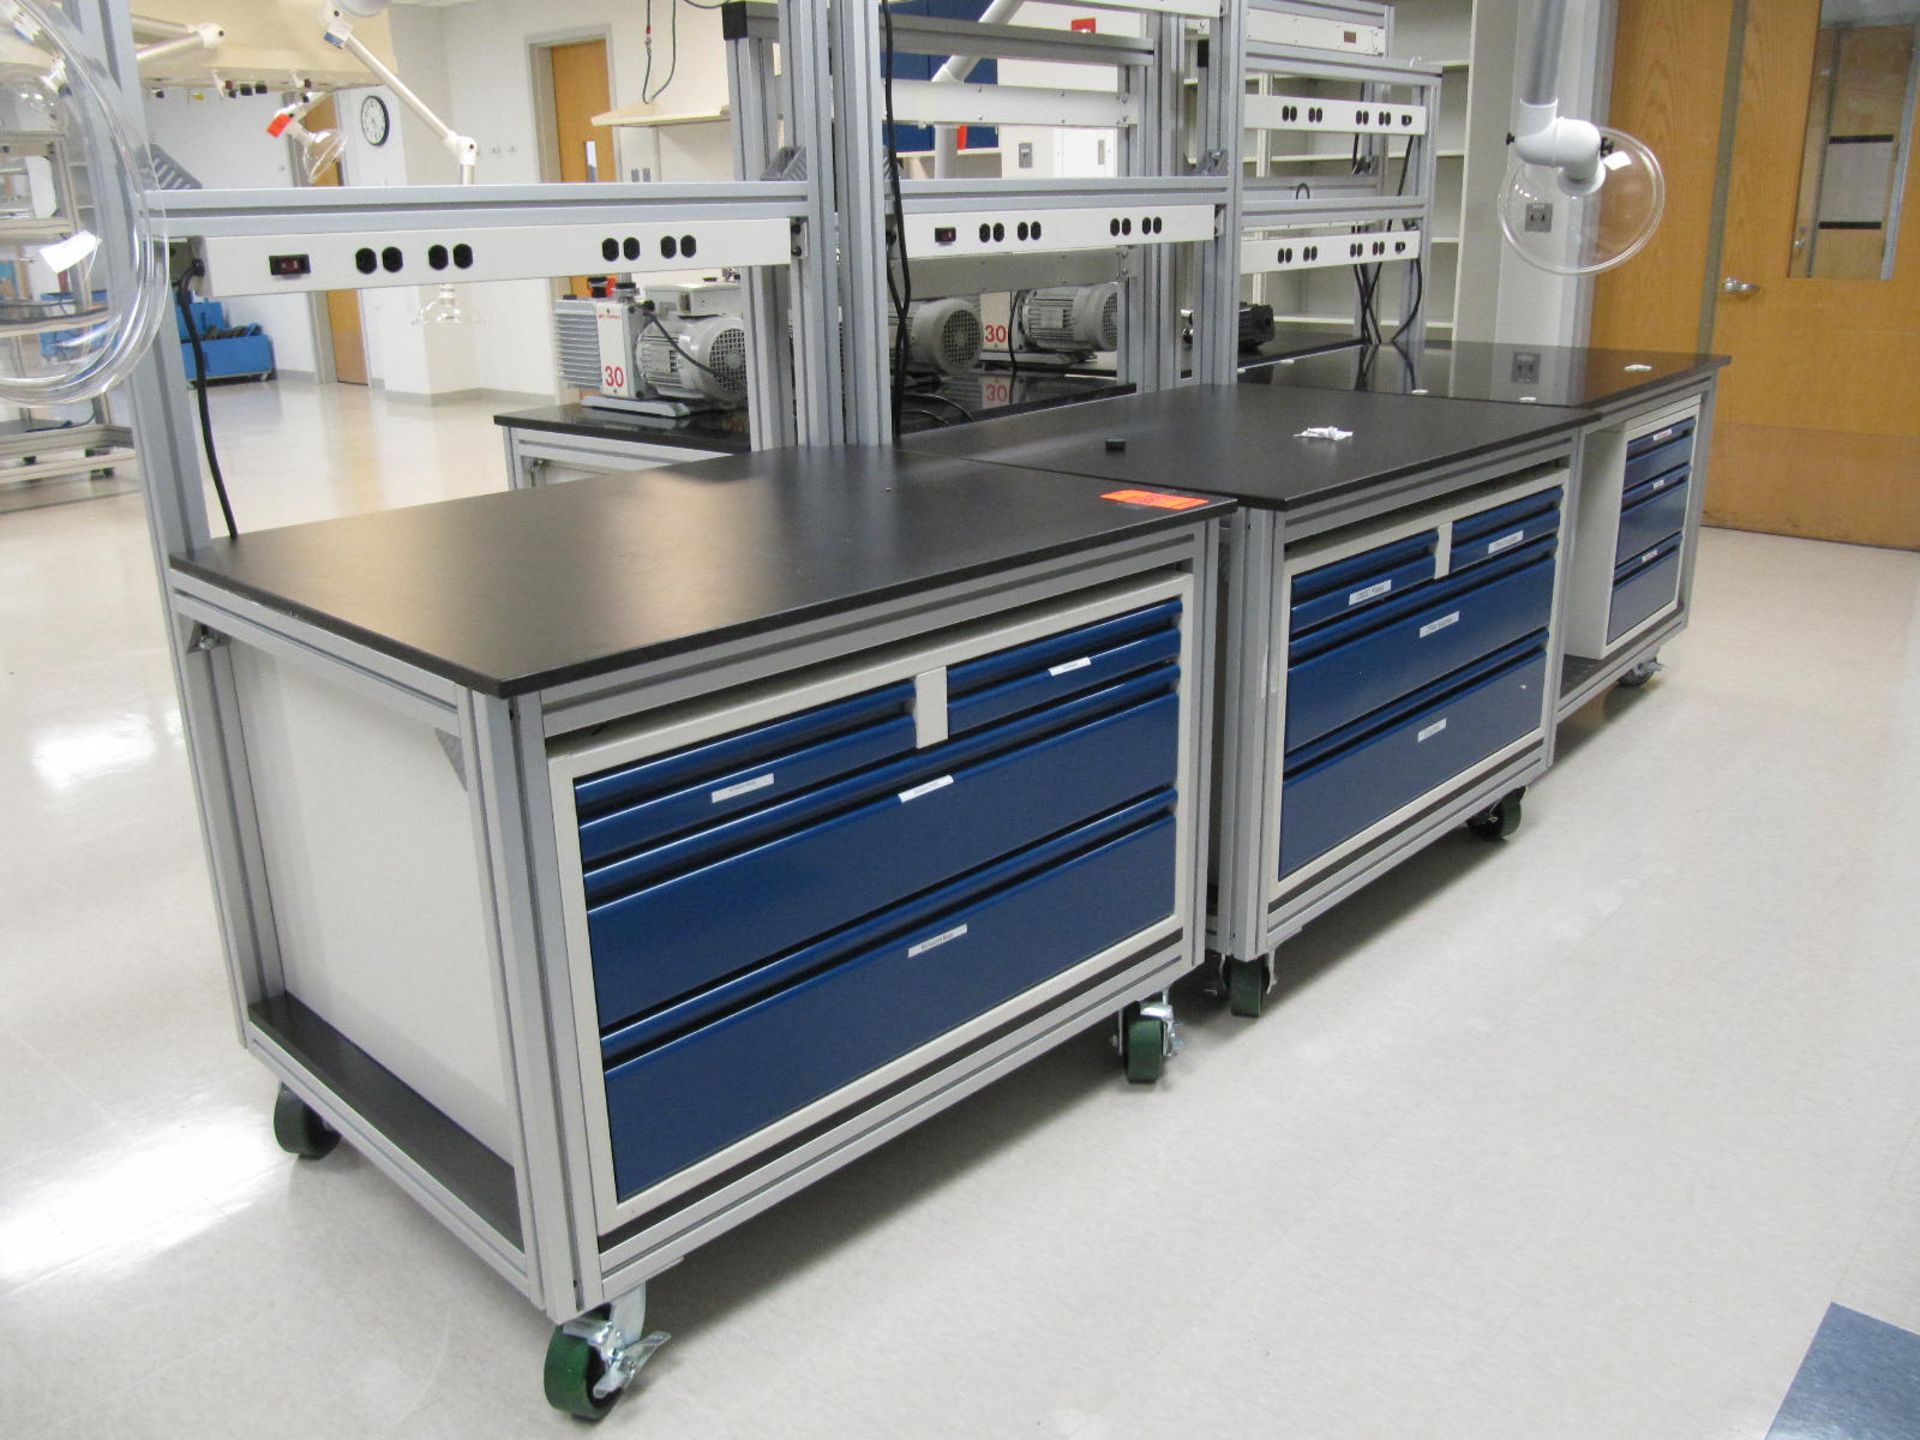 Lot of (5) mobile lab counters, approximate 48" X 36", with drawers and power distribution panels,